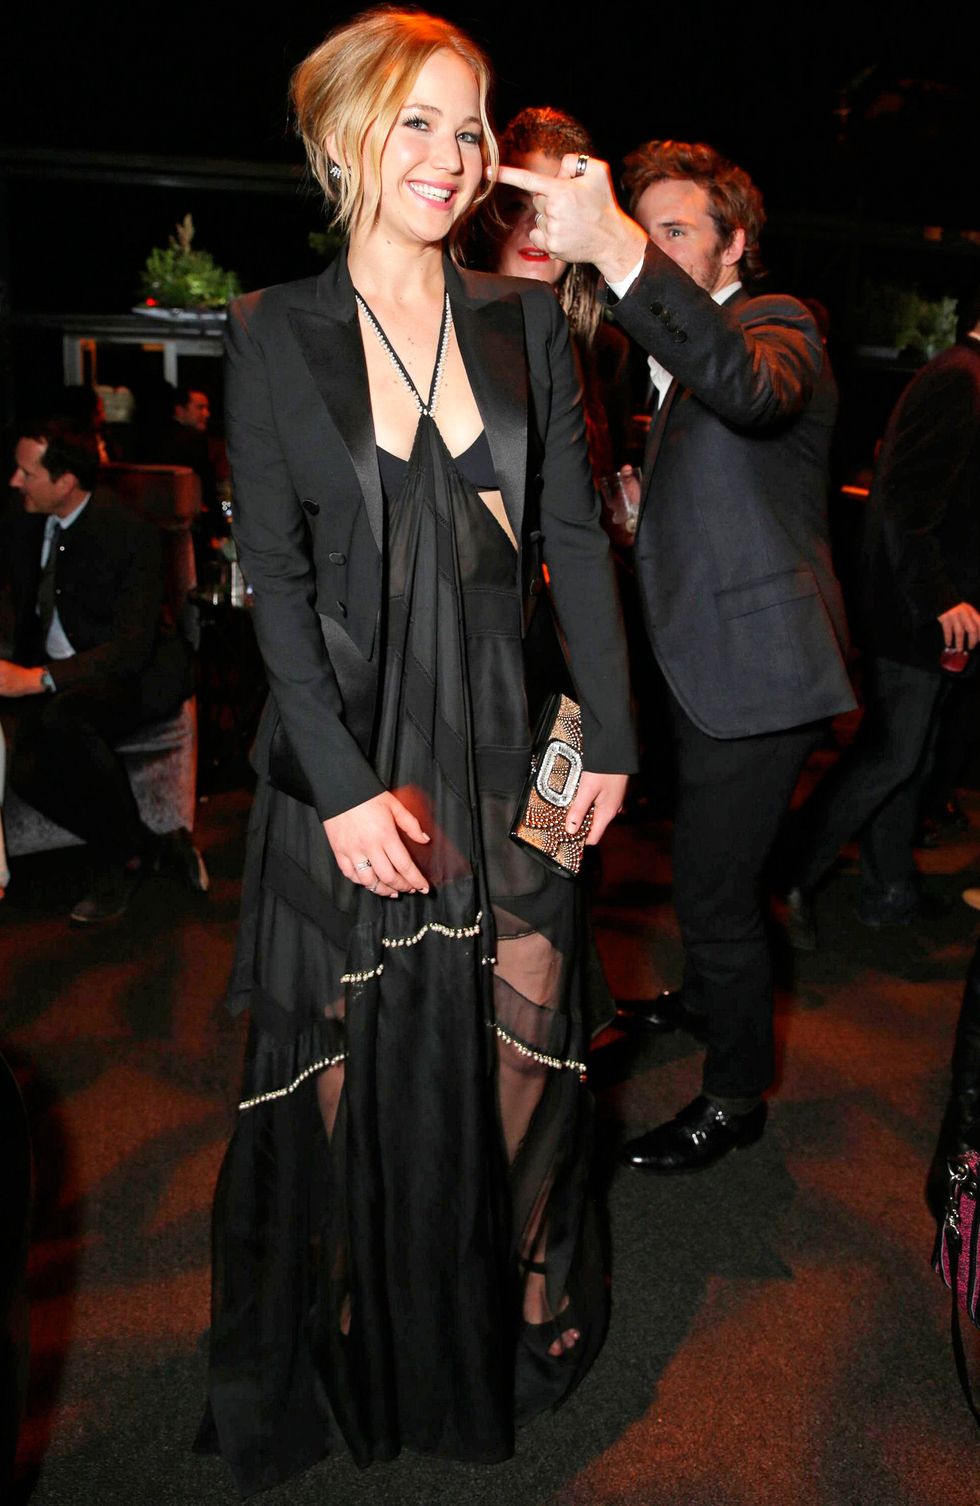 Jennifer Lawrence wearing a black sheer gown at the Hunger Games LA after party